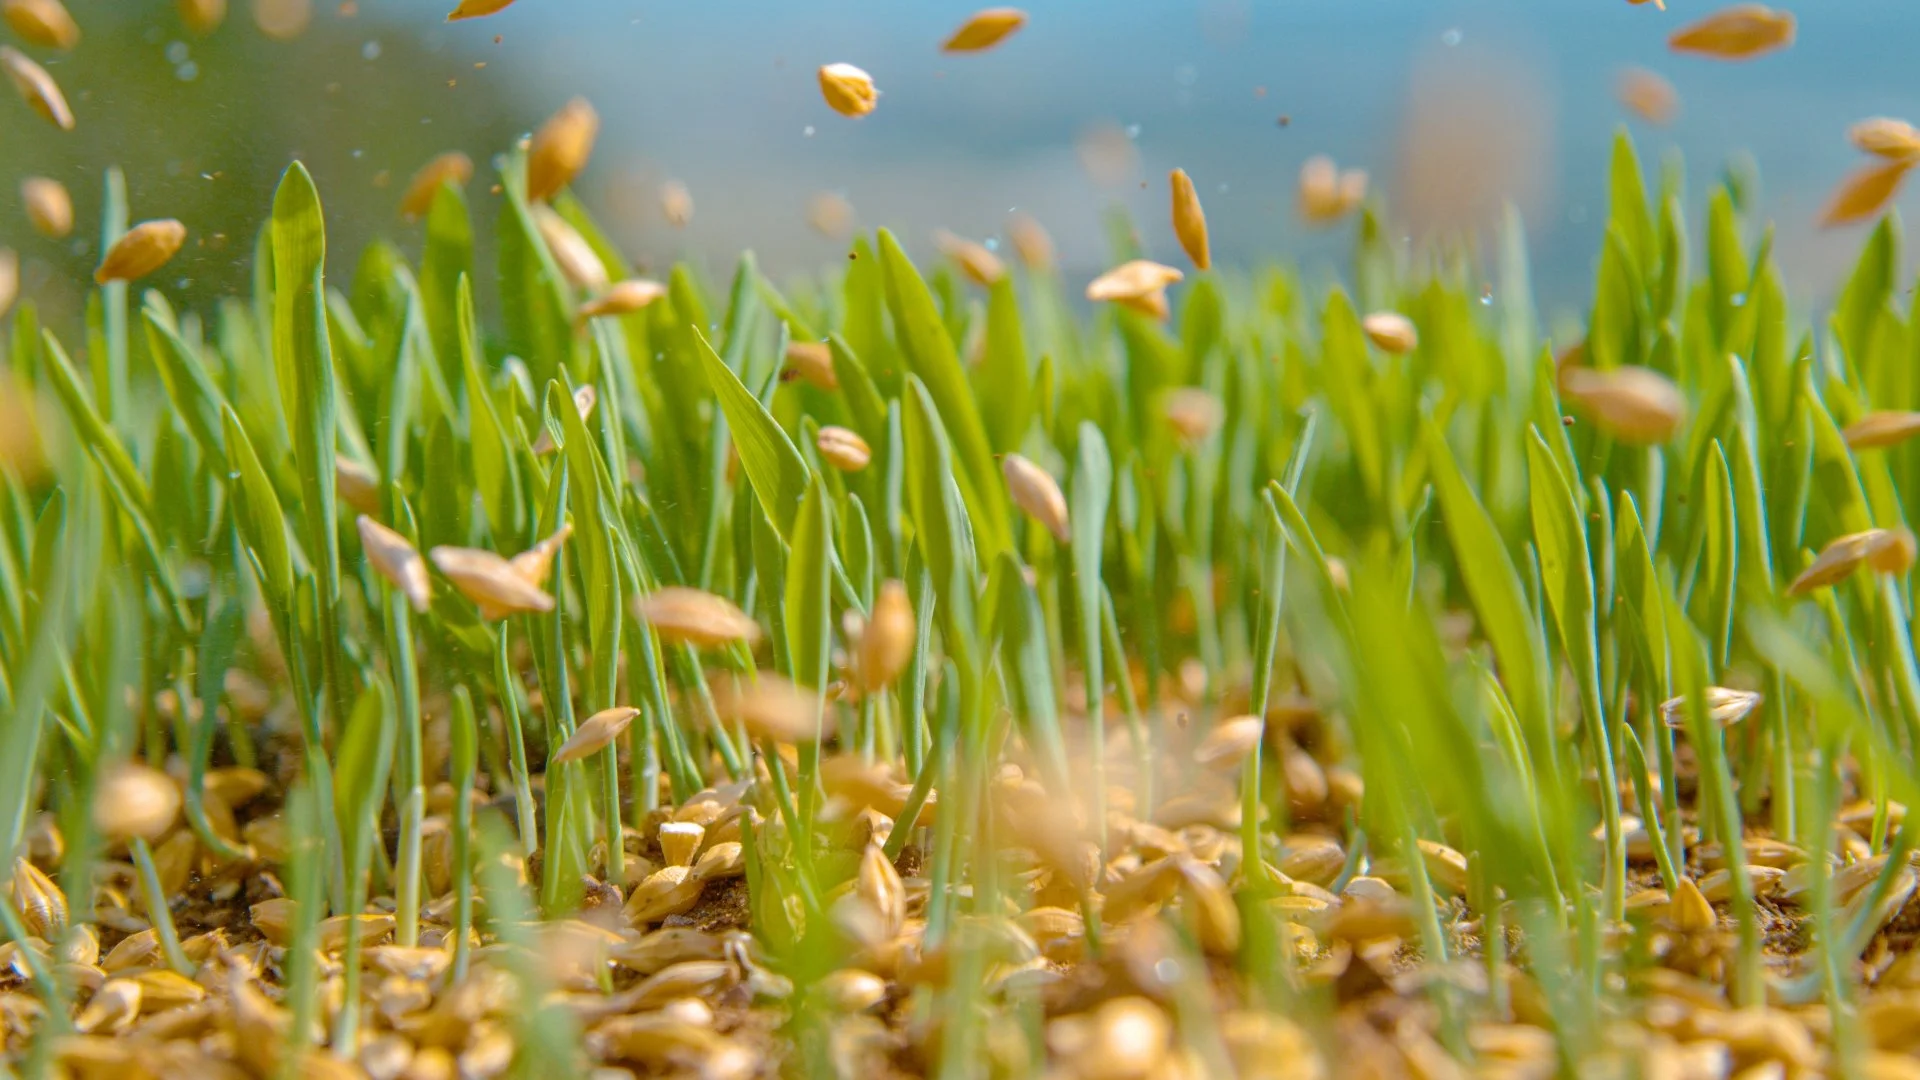 How Long Should You Wait to Fertilize Your Lawn After Overseeding?